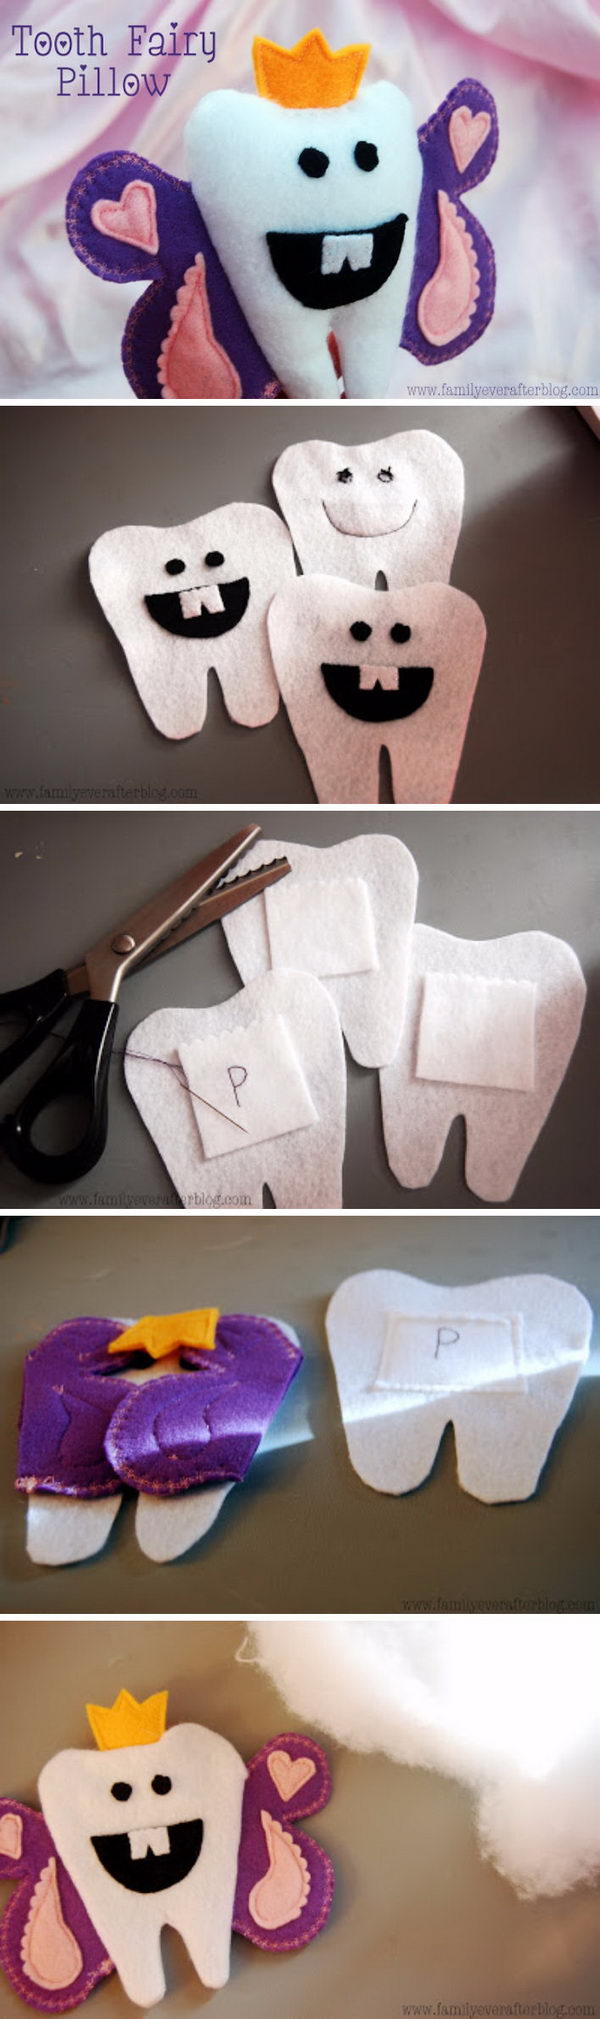 Tooth Fairy Pillow. 